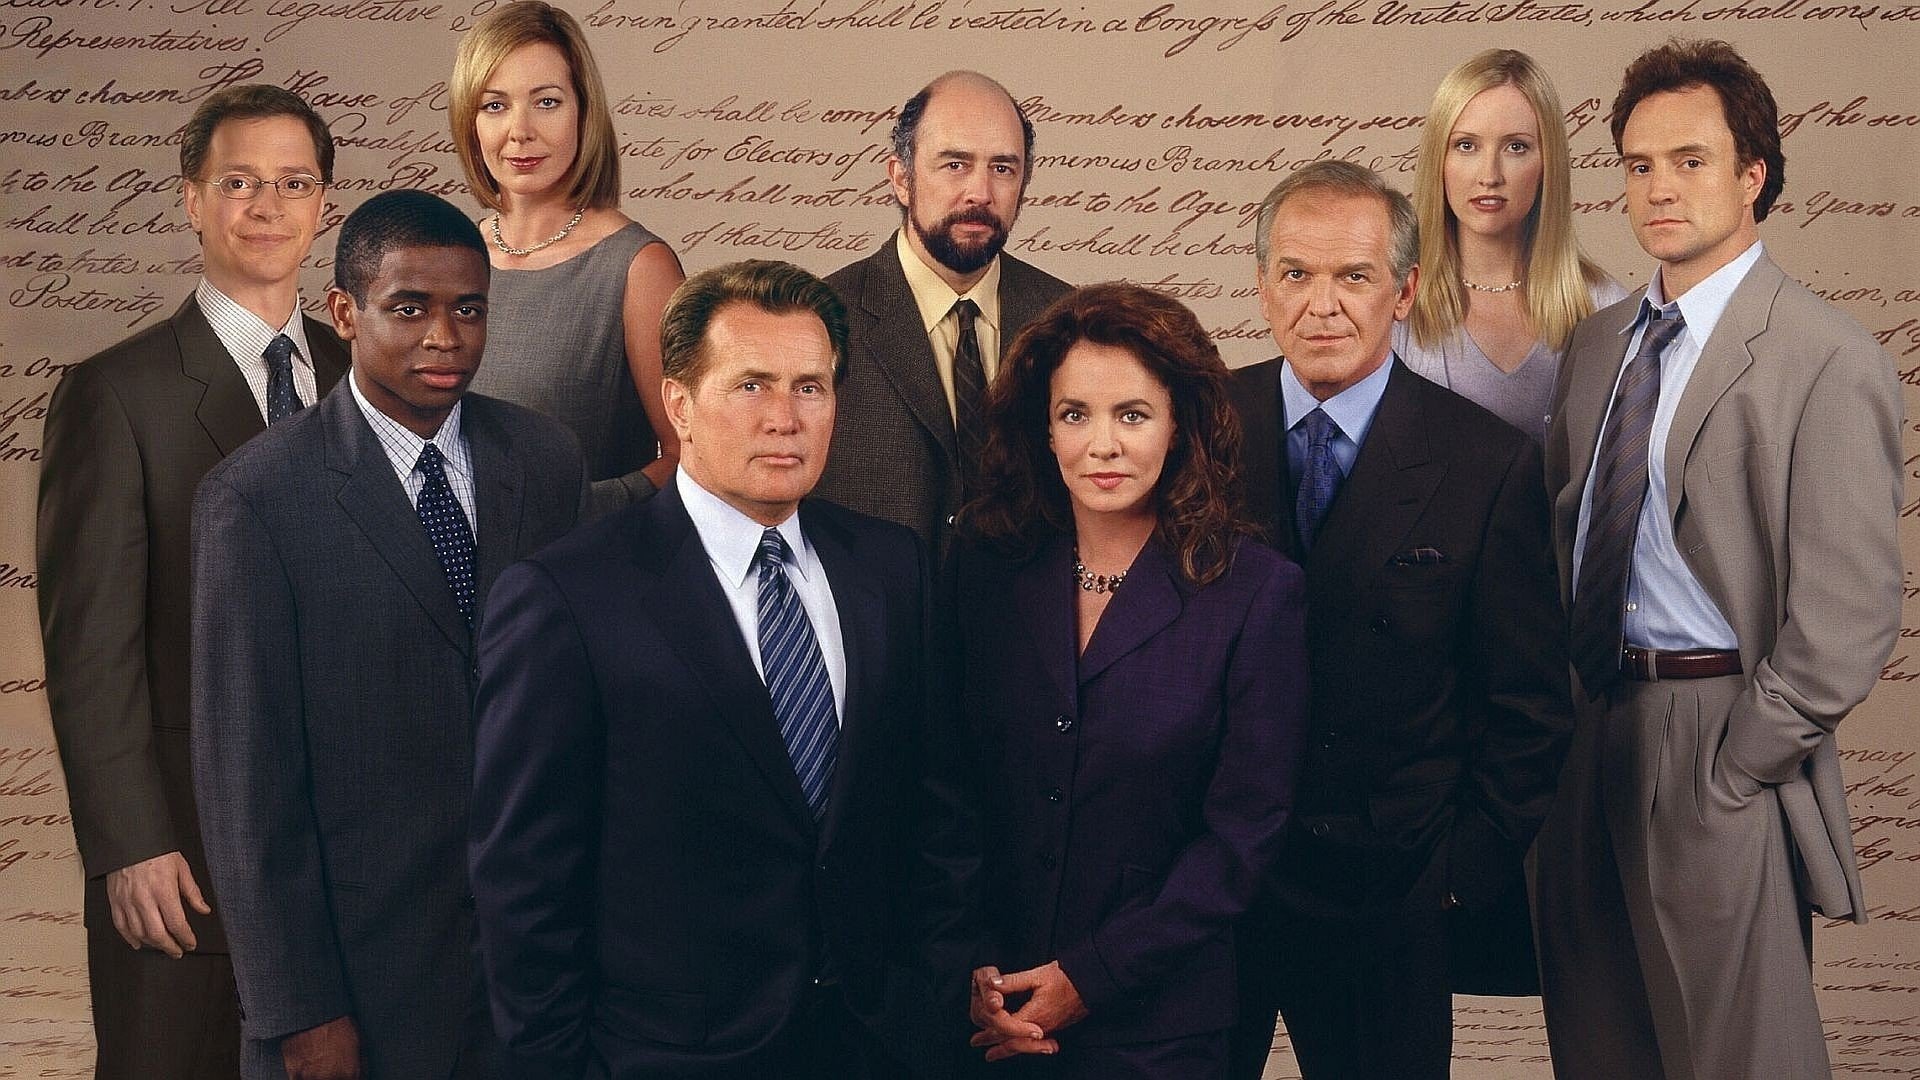 TV Show The West Wing Image. 